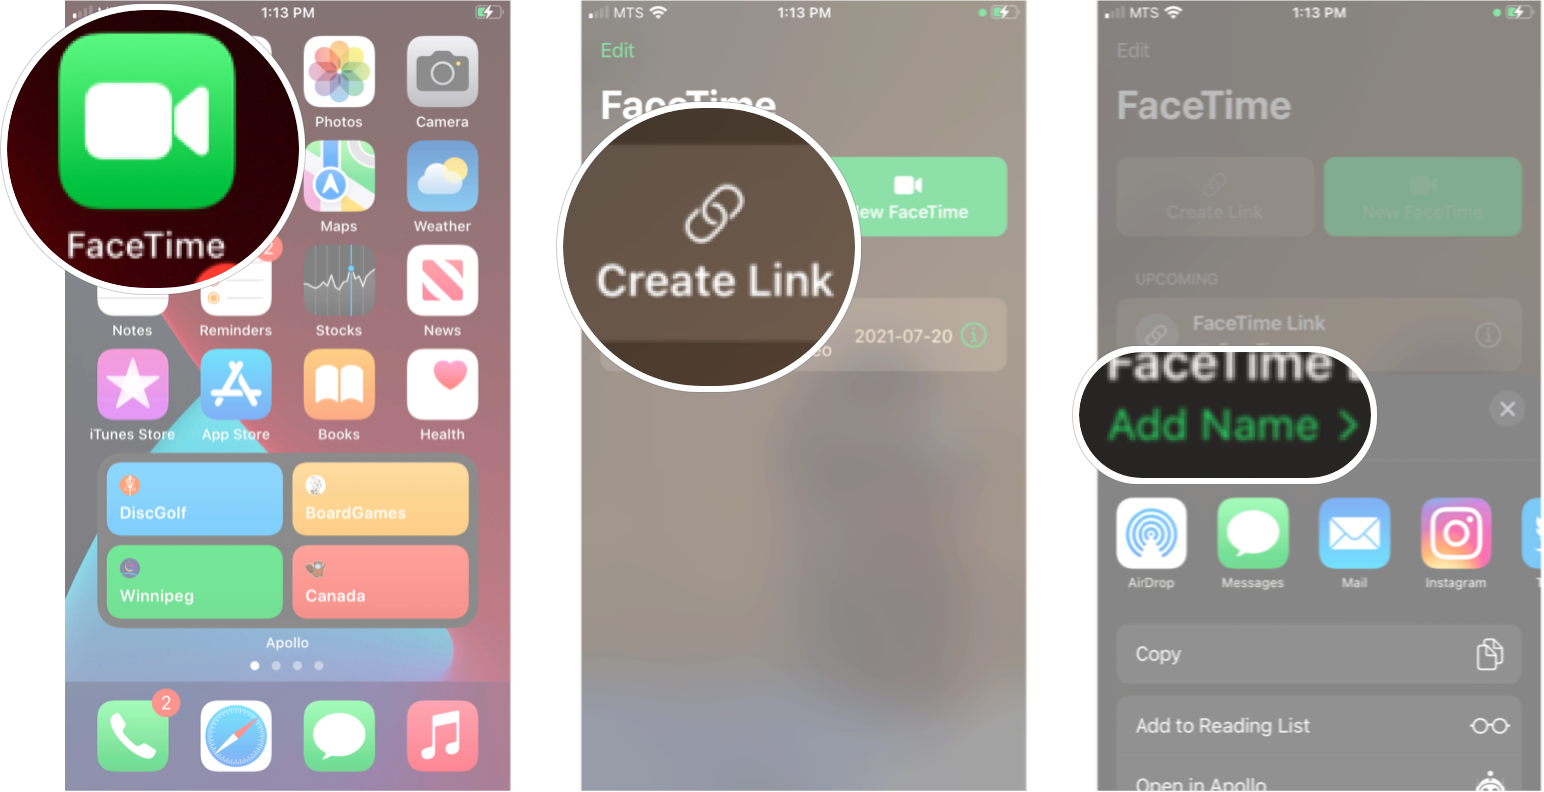 Creating FaceTime Link in iOS 15: Launch FaceTime, Tap Create Link, and then tap Add Name